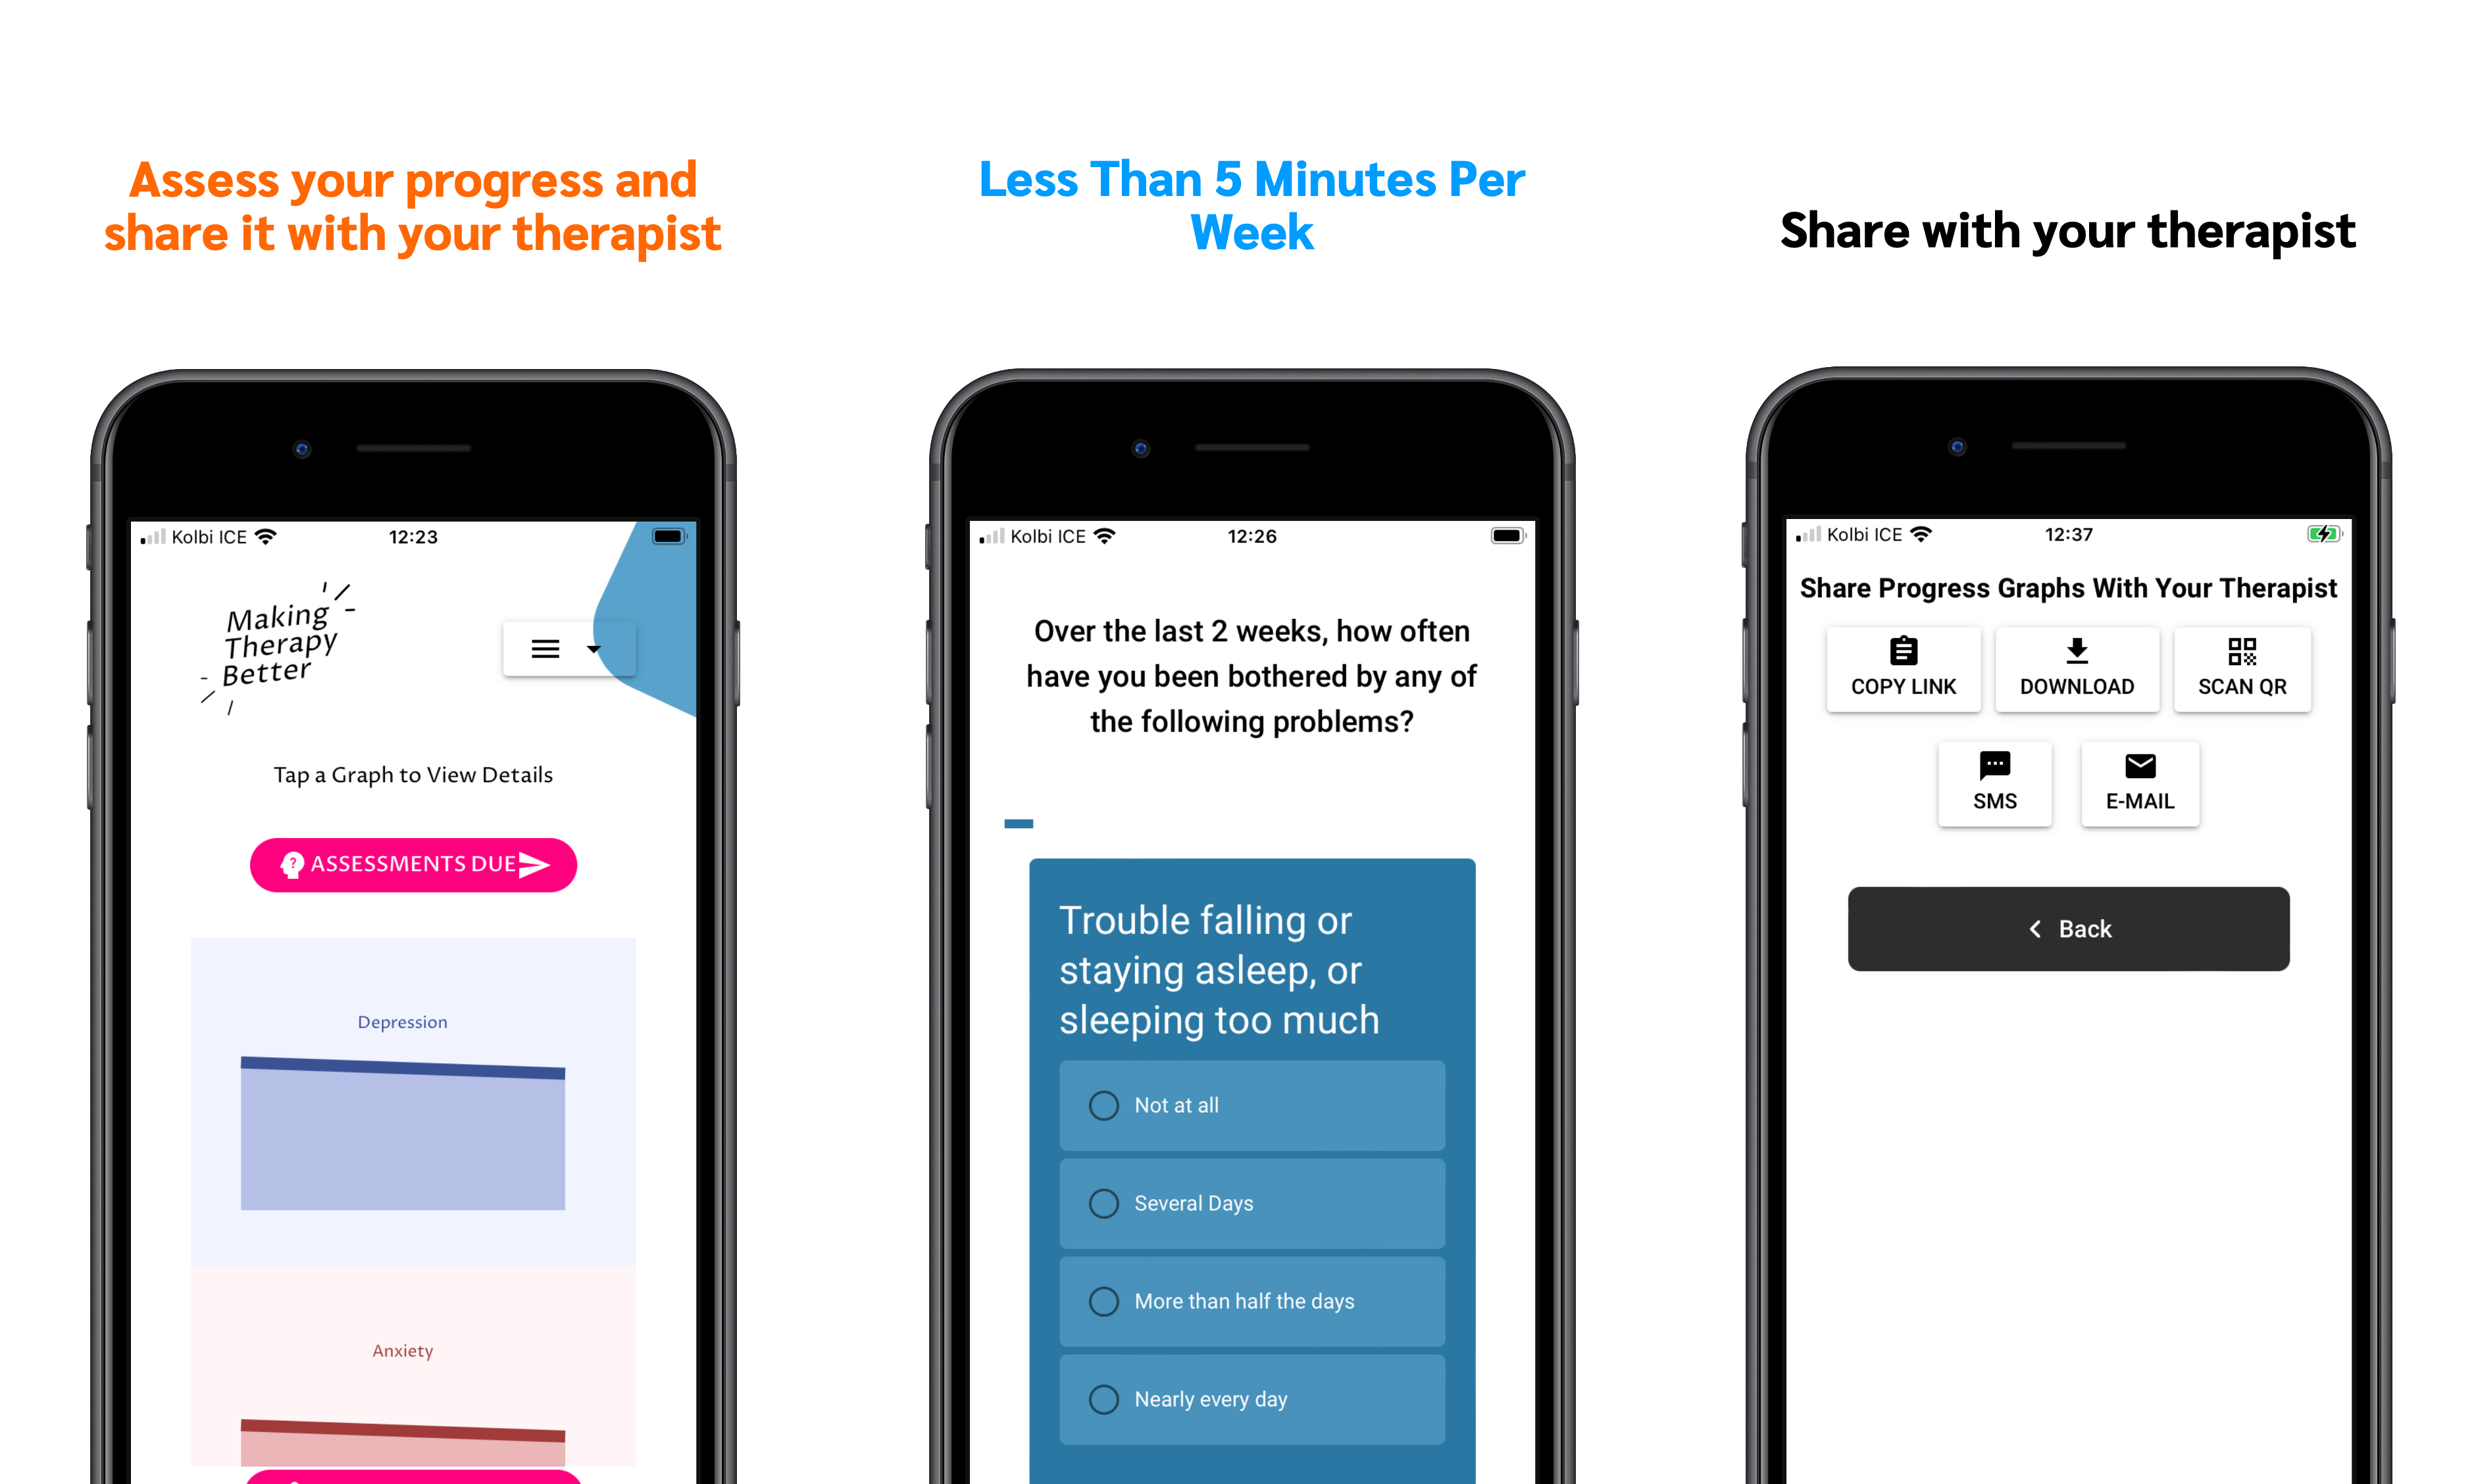 New App Shows What's Working in Psychotherapy